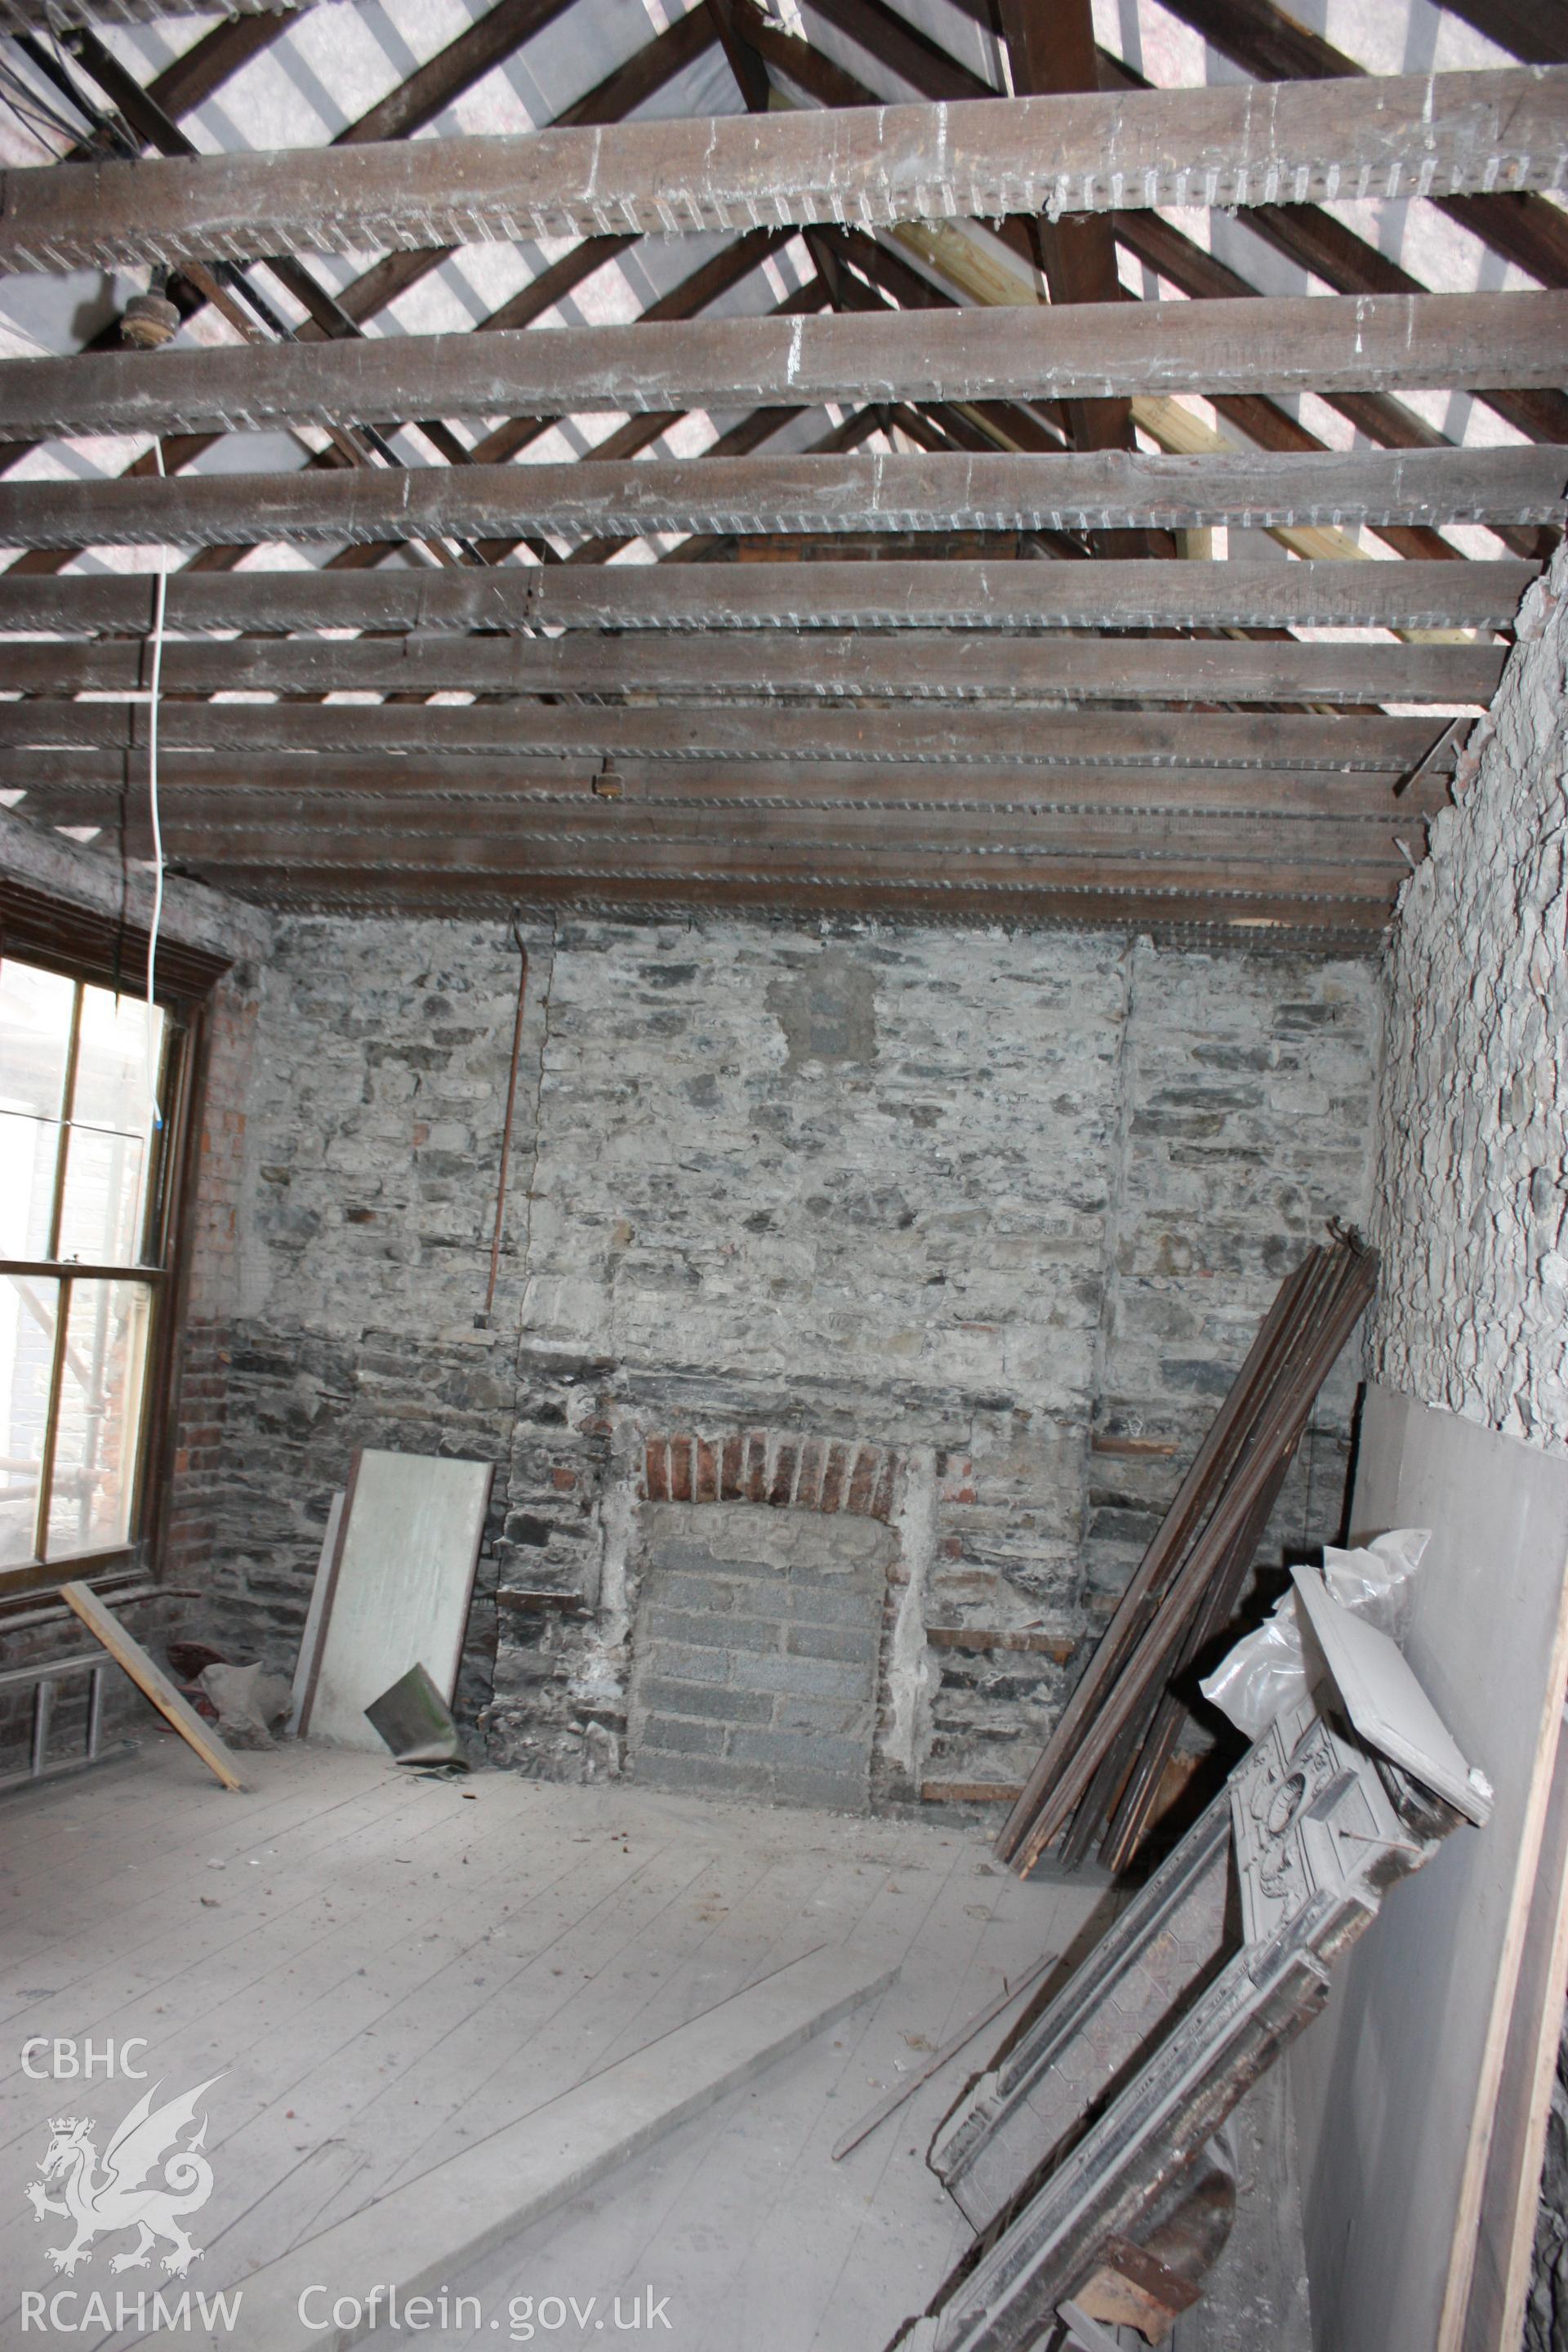 Colour photograph showing interior view of rear extension to the first floor at the Old Auction Rooms/ Liberal Club in Aberystwyth. Photographic survey conducted by Geoff Ward on 9th June 2010 during repair work prior to conversion into flats.